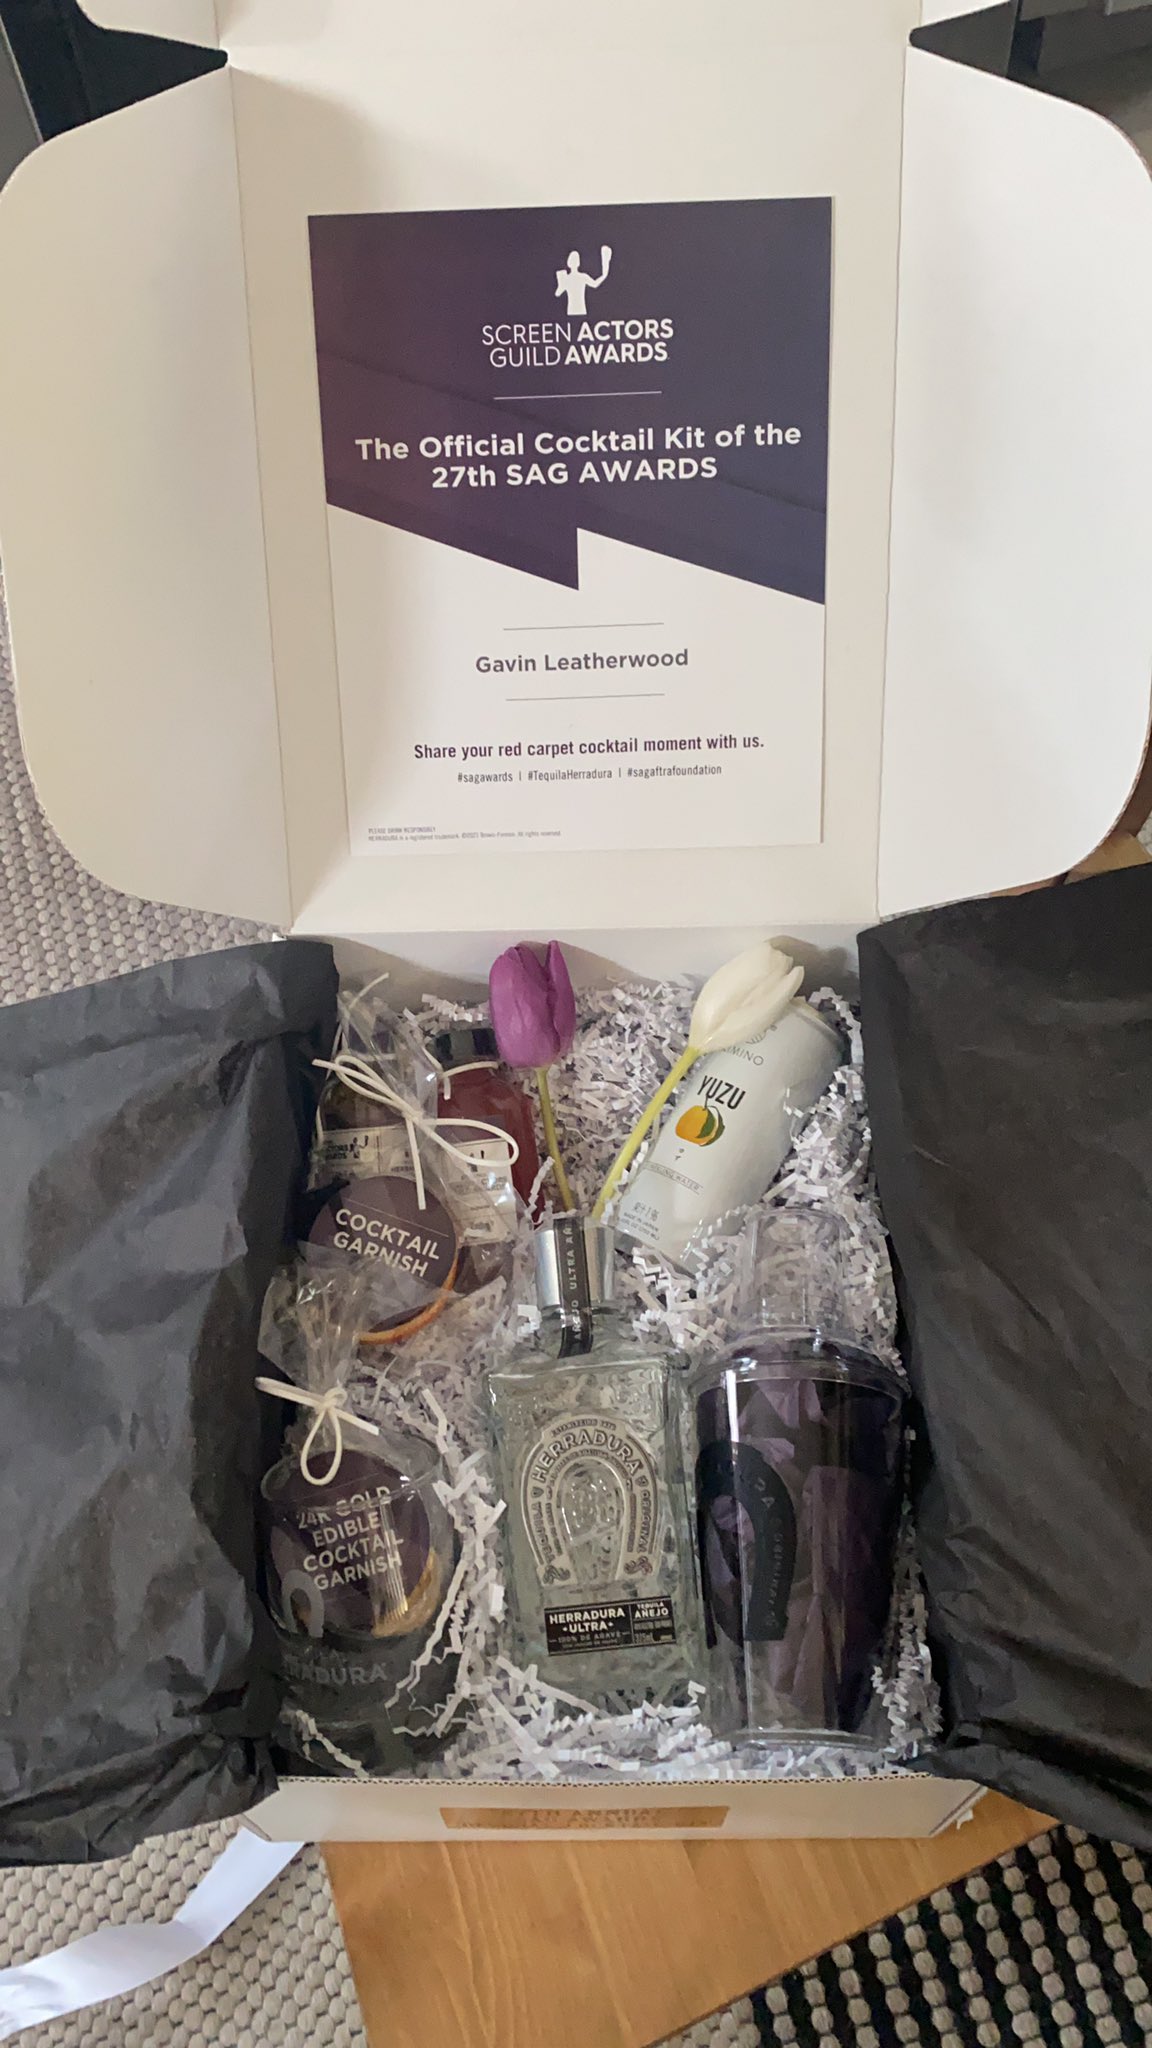 Gavin on Twitter: "Hey #sagaftrafoundation thanks for sponsoring the night with this cocktail kit. I promise I'll behave https://t.co/jdMJczxJAK" / Twitter